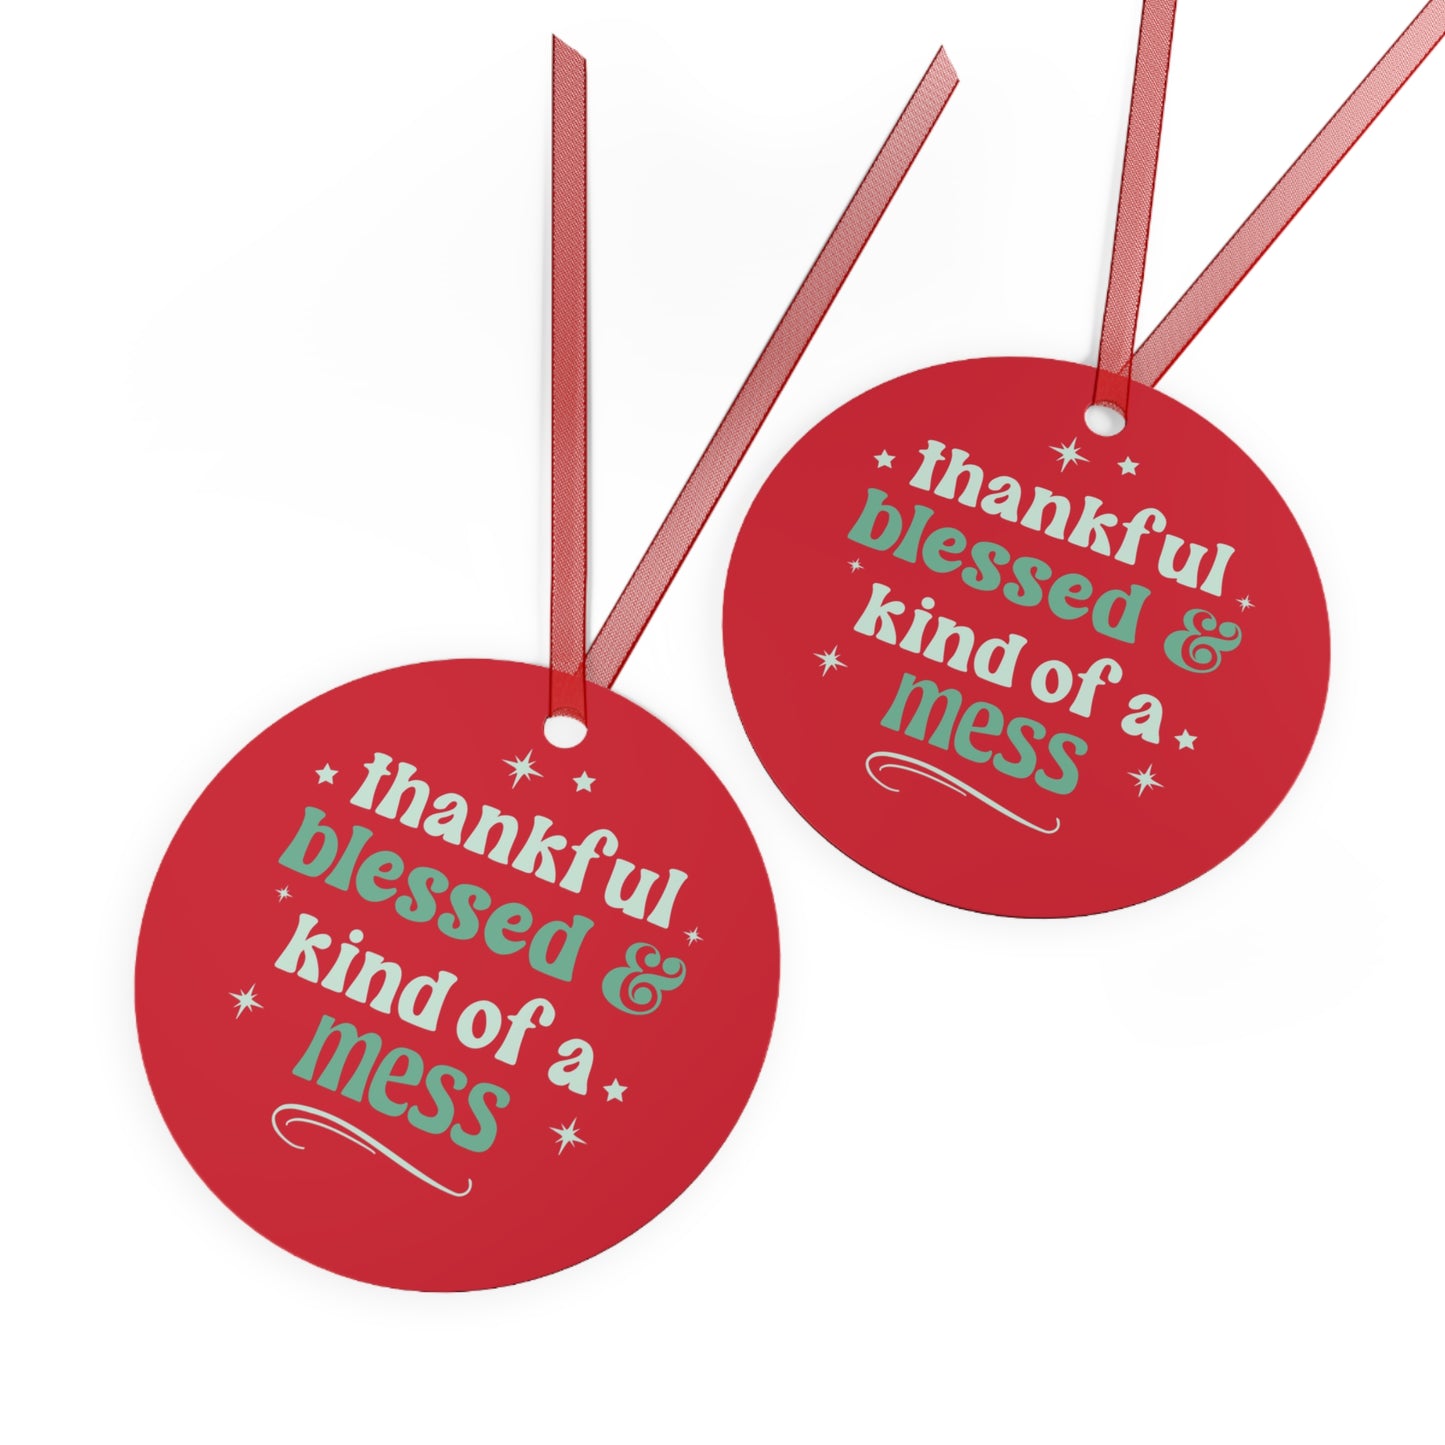 Thankful, Blessed & Kind of a Mess Christmas Ornament